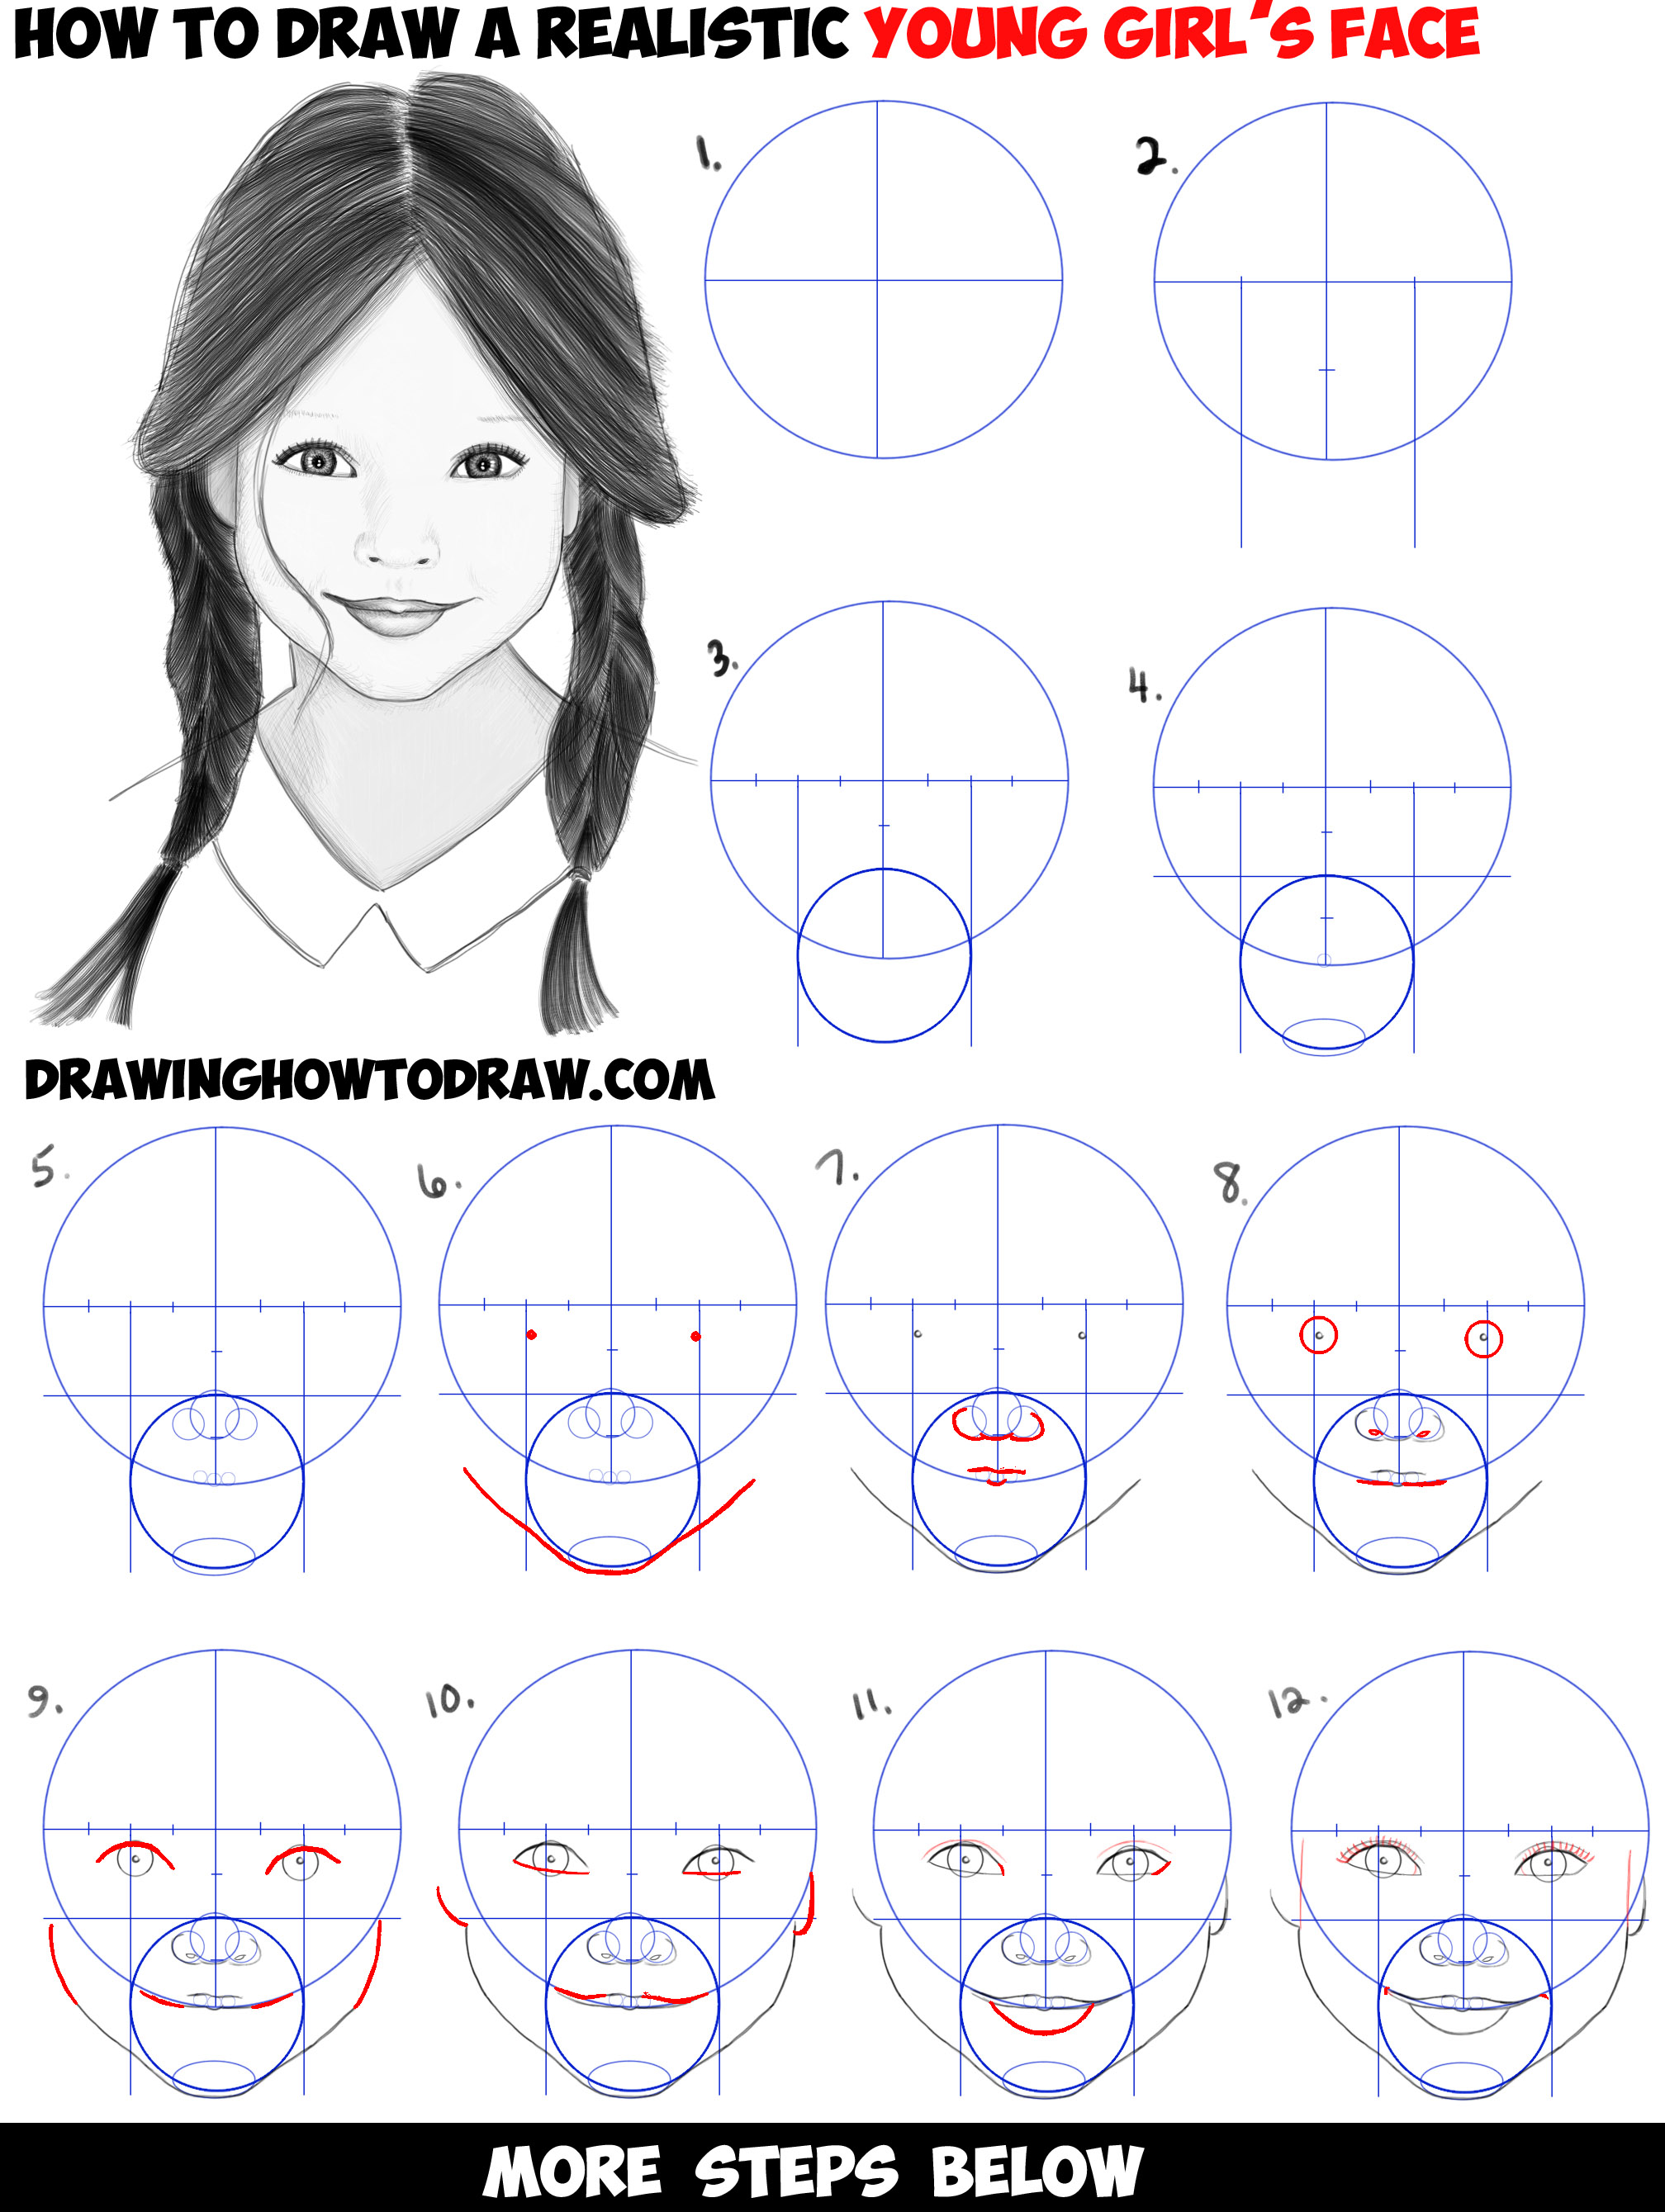 https://www.drawinghowtodraw.com/stepbystepdrawinglessons/wp-content/uploads/2017/11/how-to-draw-a-realistic-little-girls-face-head-braids-easy-step-by-step-drawing-tutorial-for-beginners-portrait.jpg